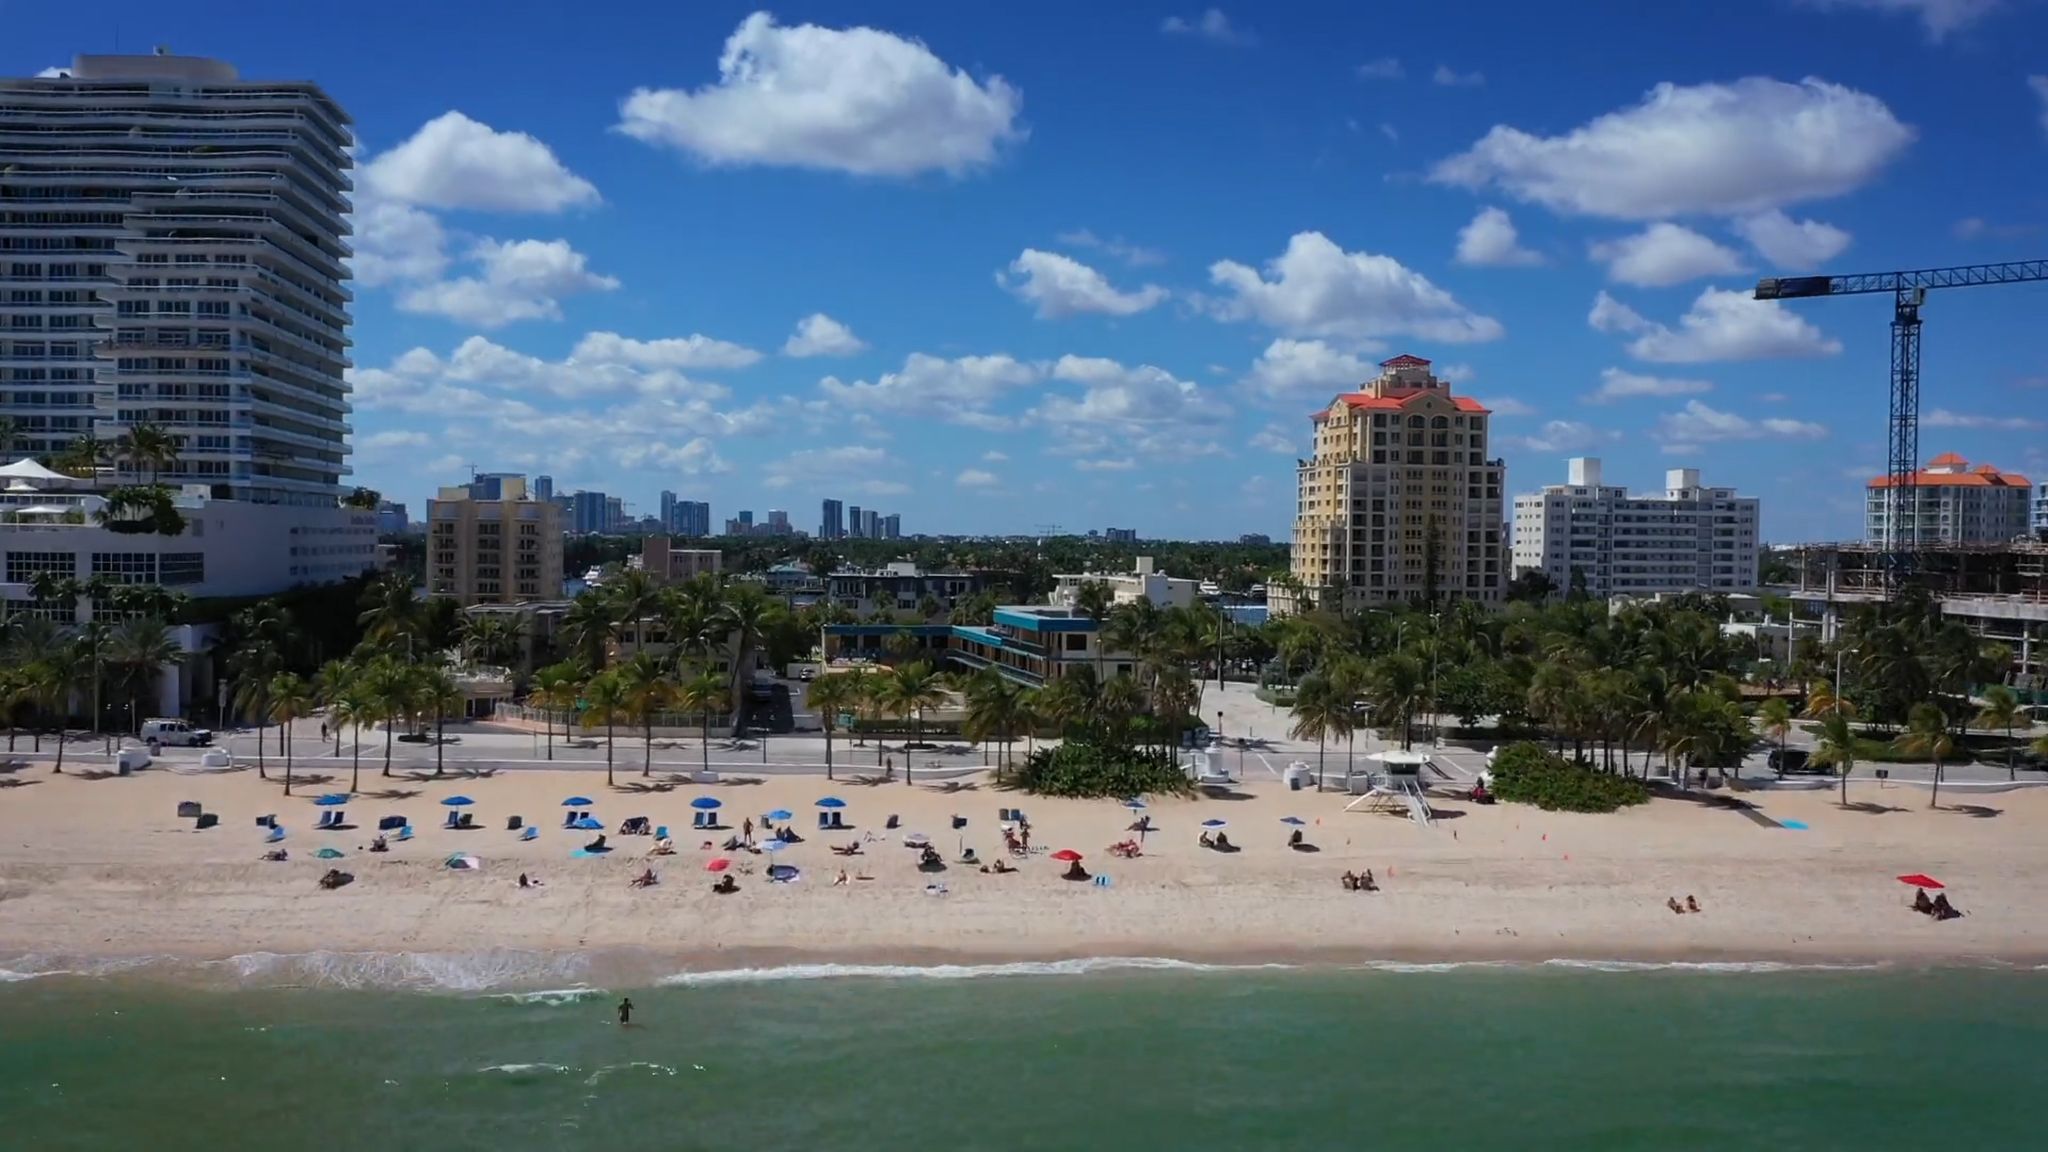 Aerial view of a beach with buildings in the background